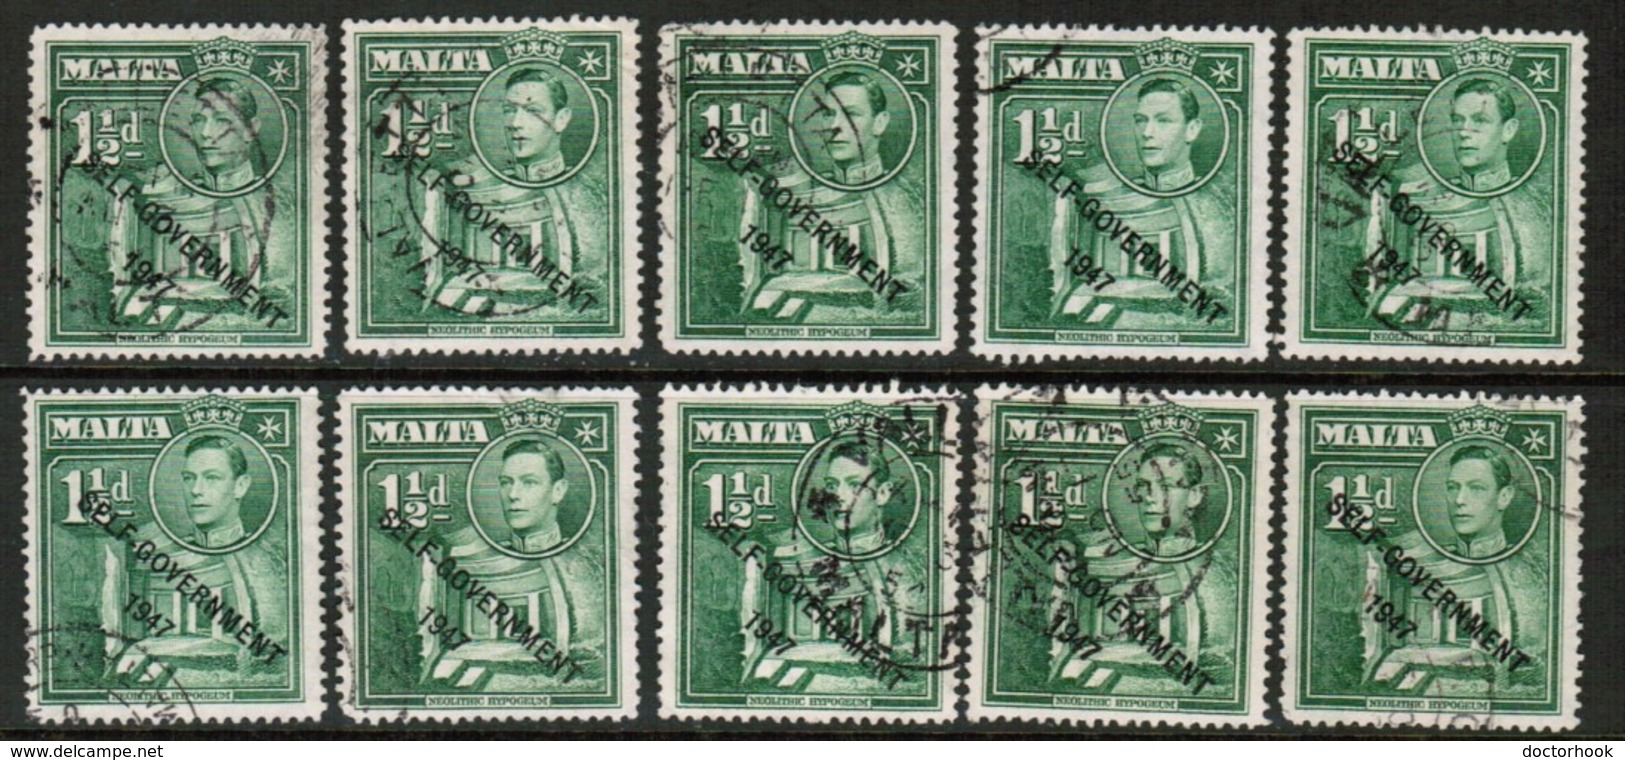 MALTA  Scott # 236 USED WHOLESALE LOT OF 10 (WH-329) - Lots & Kiloware (mixtures) - Max. 999 Stamps